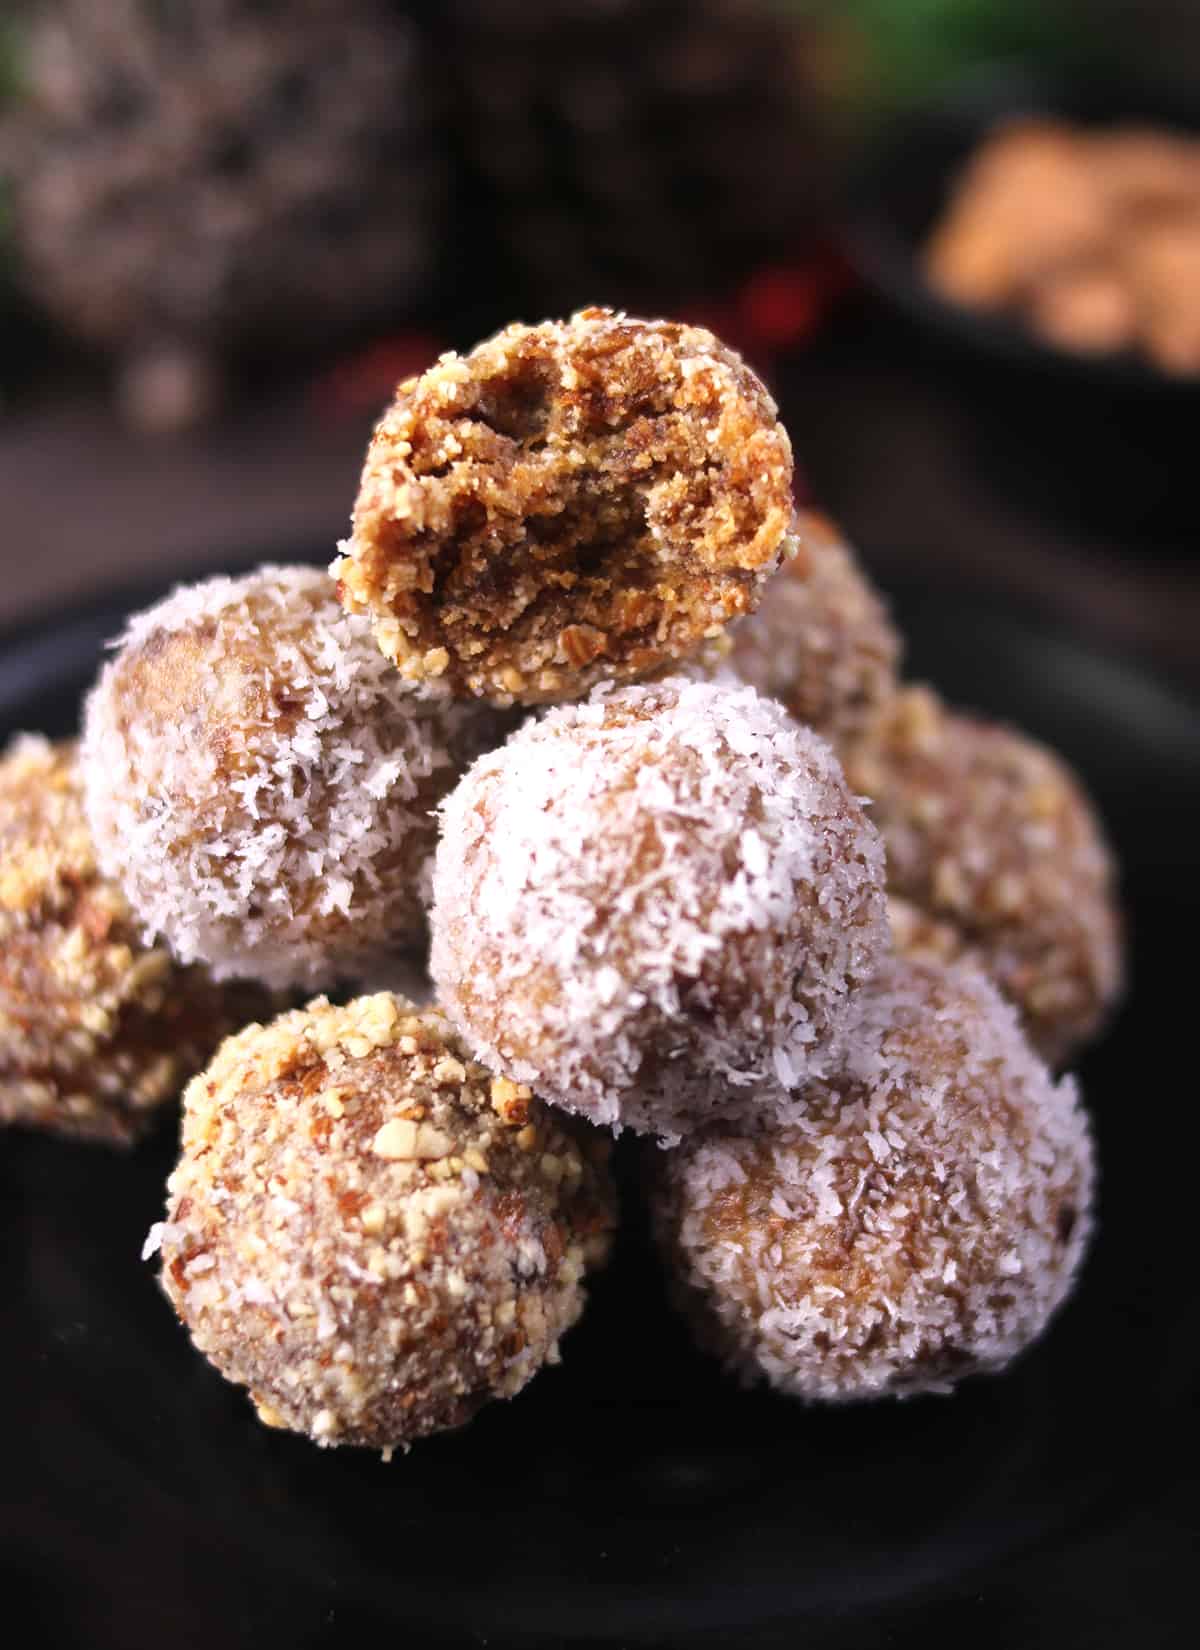 Coconut date balls - No Bake Christmas treats. Date energy balls coated with almonds and coconut. 